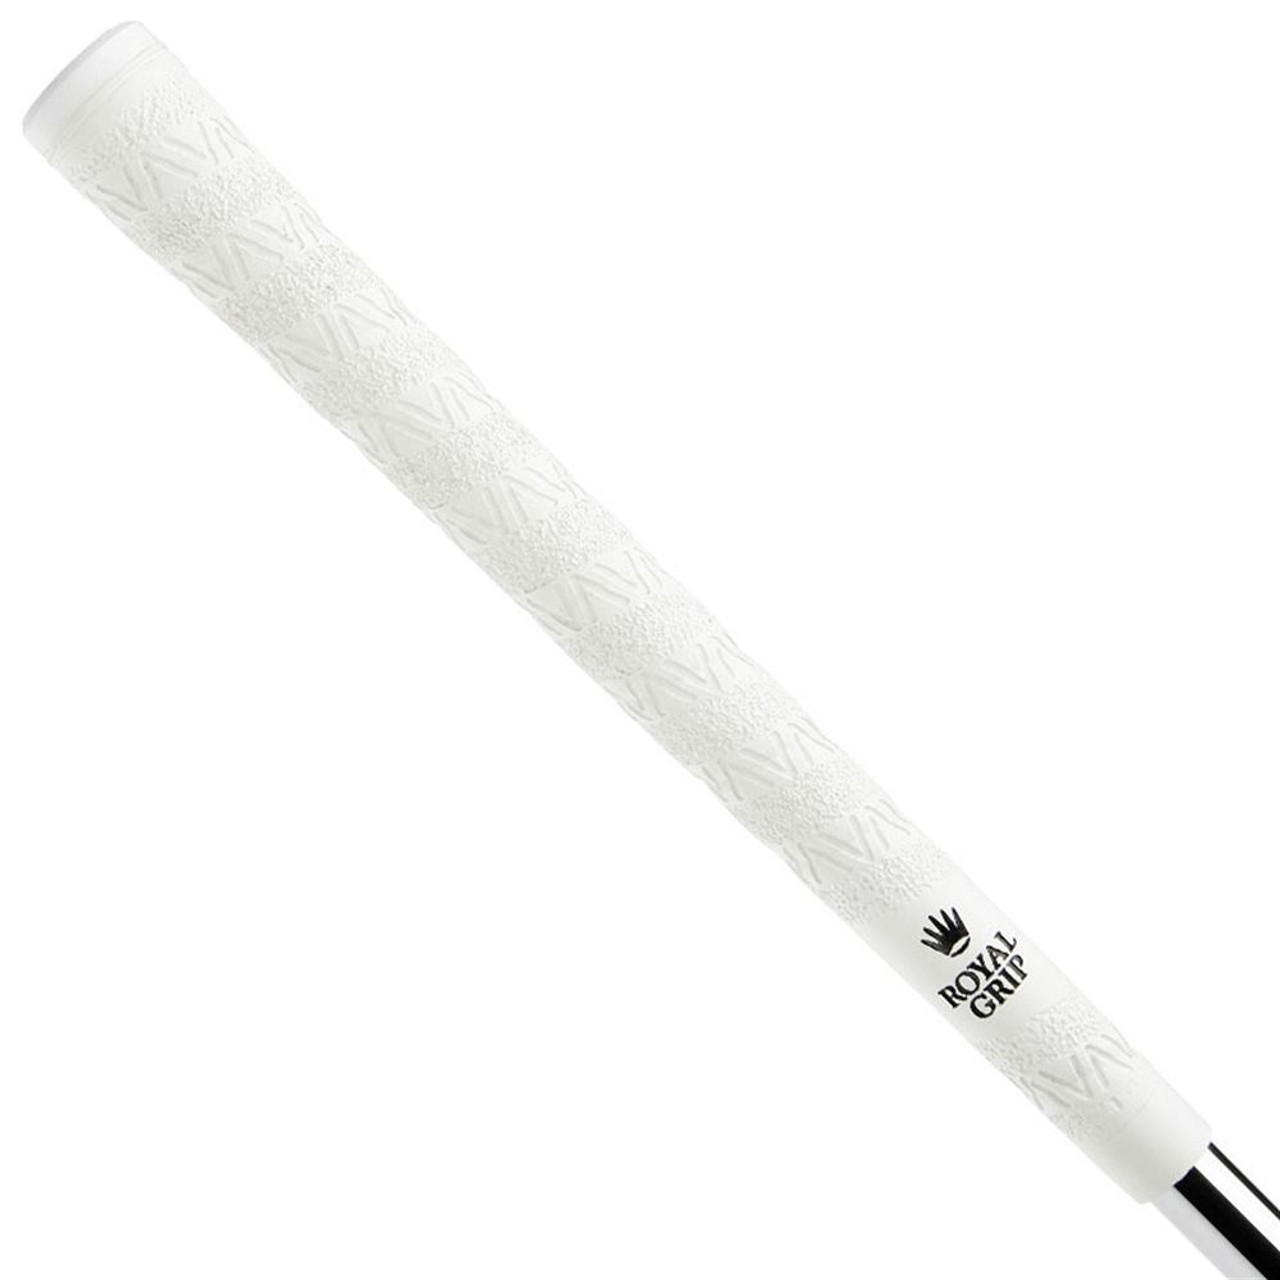 PURE Wrap Golf Grips - The GolfWorks